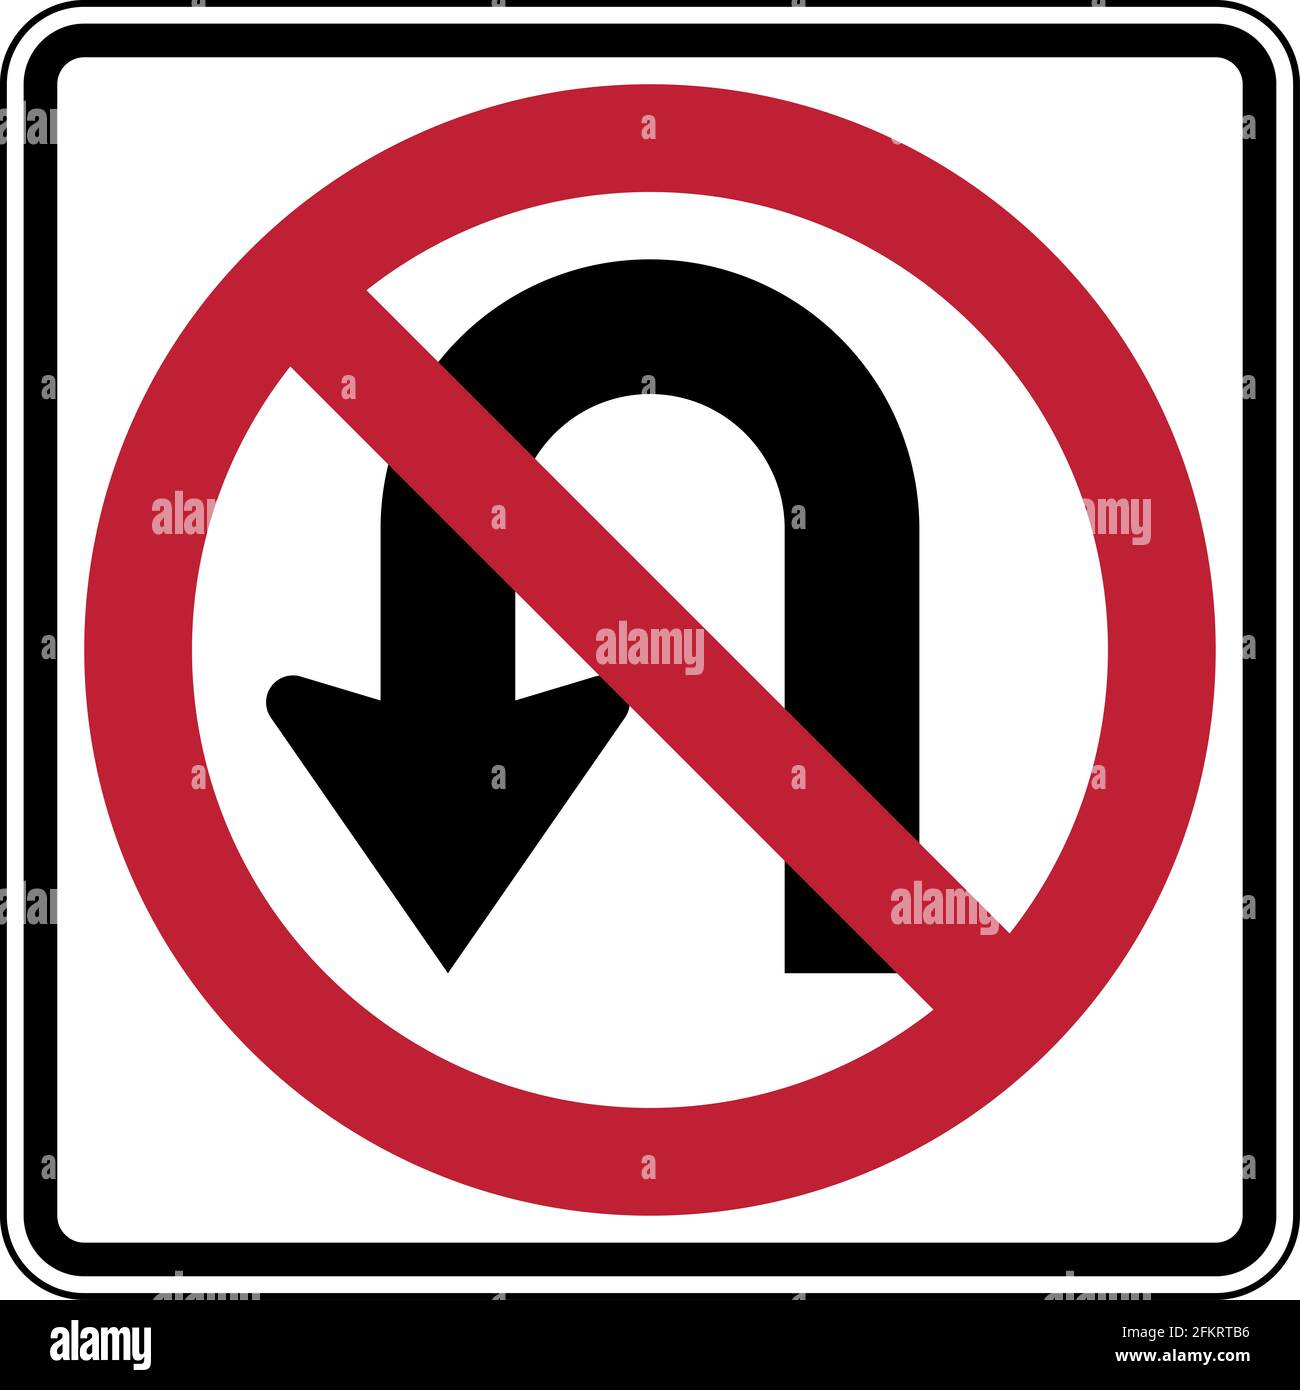 No U-turn Official US Road Sign Illustration Stock Photo